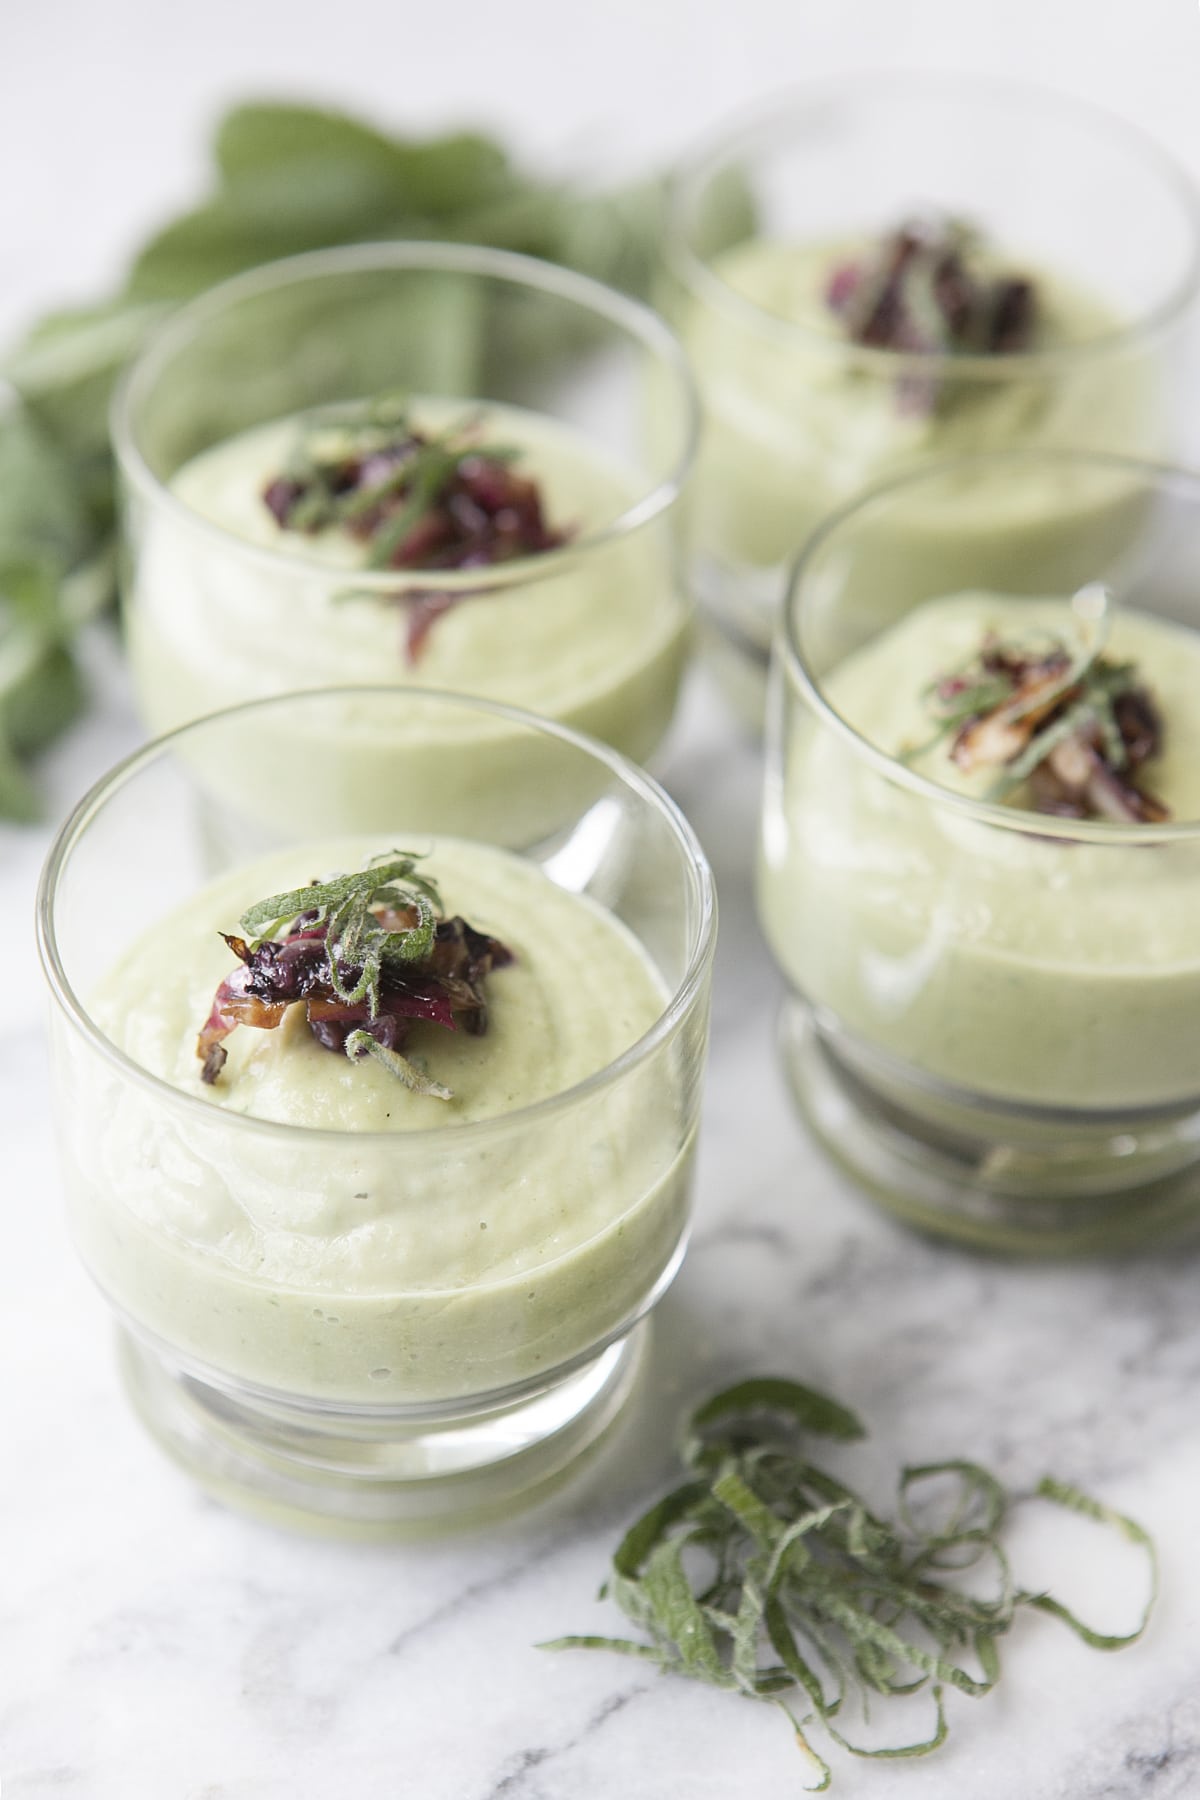 Chilled Avocado Mint Soup | Roasted Radicchio | Easy Appetizers Recipe | Jessica Brigham Blog